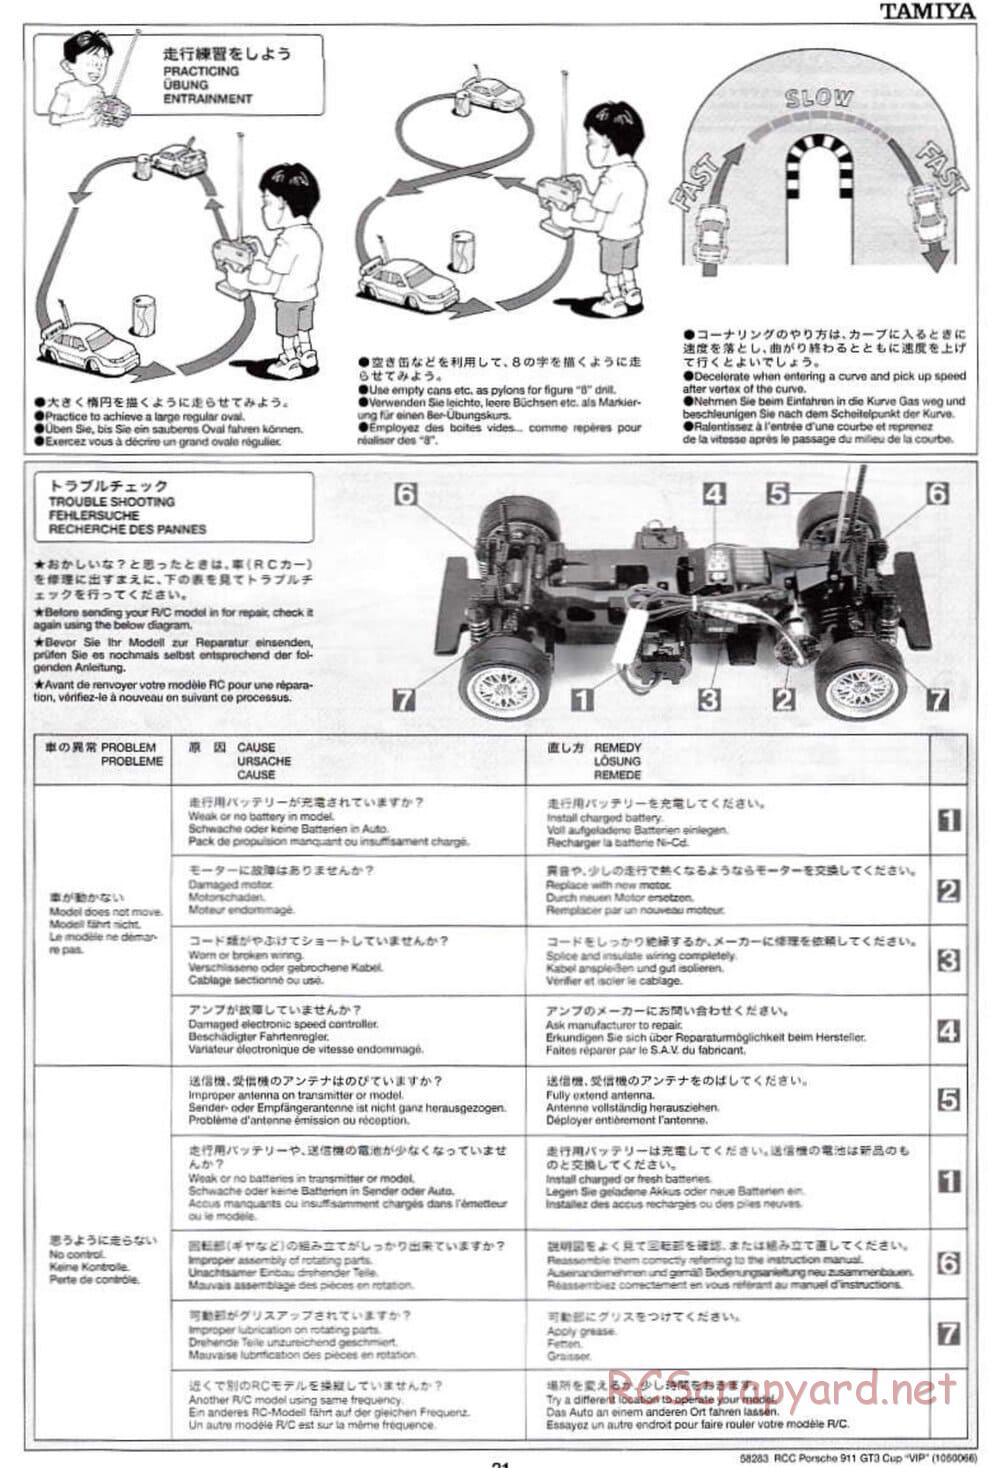 Tamiya - Porsche 911 GT3 Cup VIP - TL-01 Chassis - Manual - Page 21